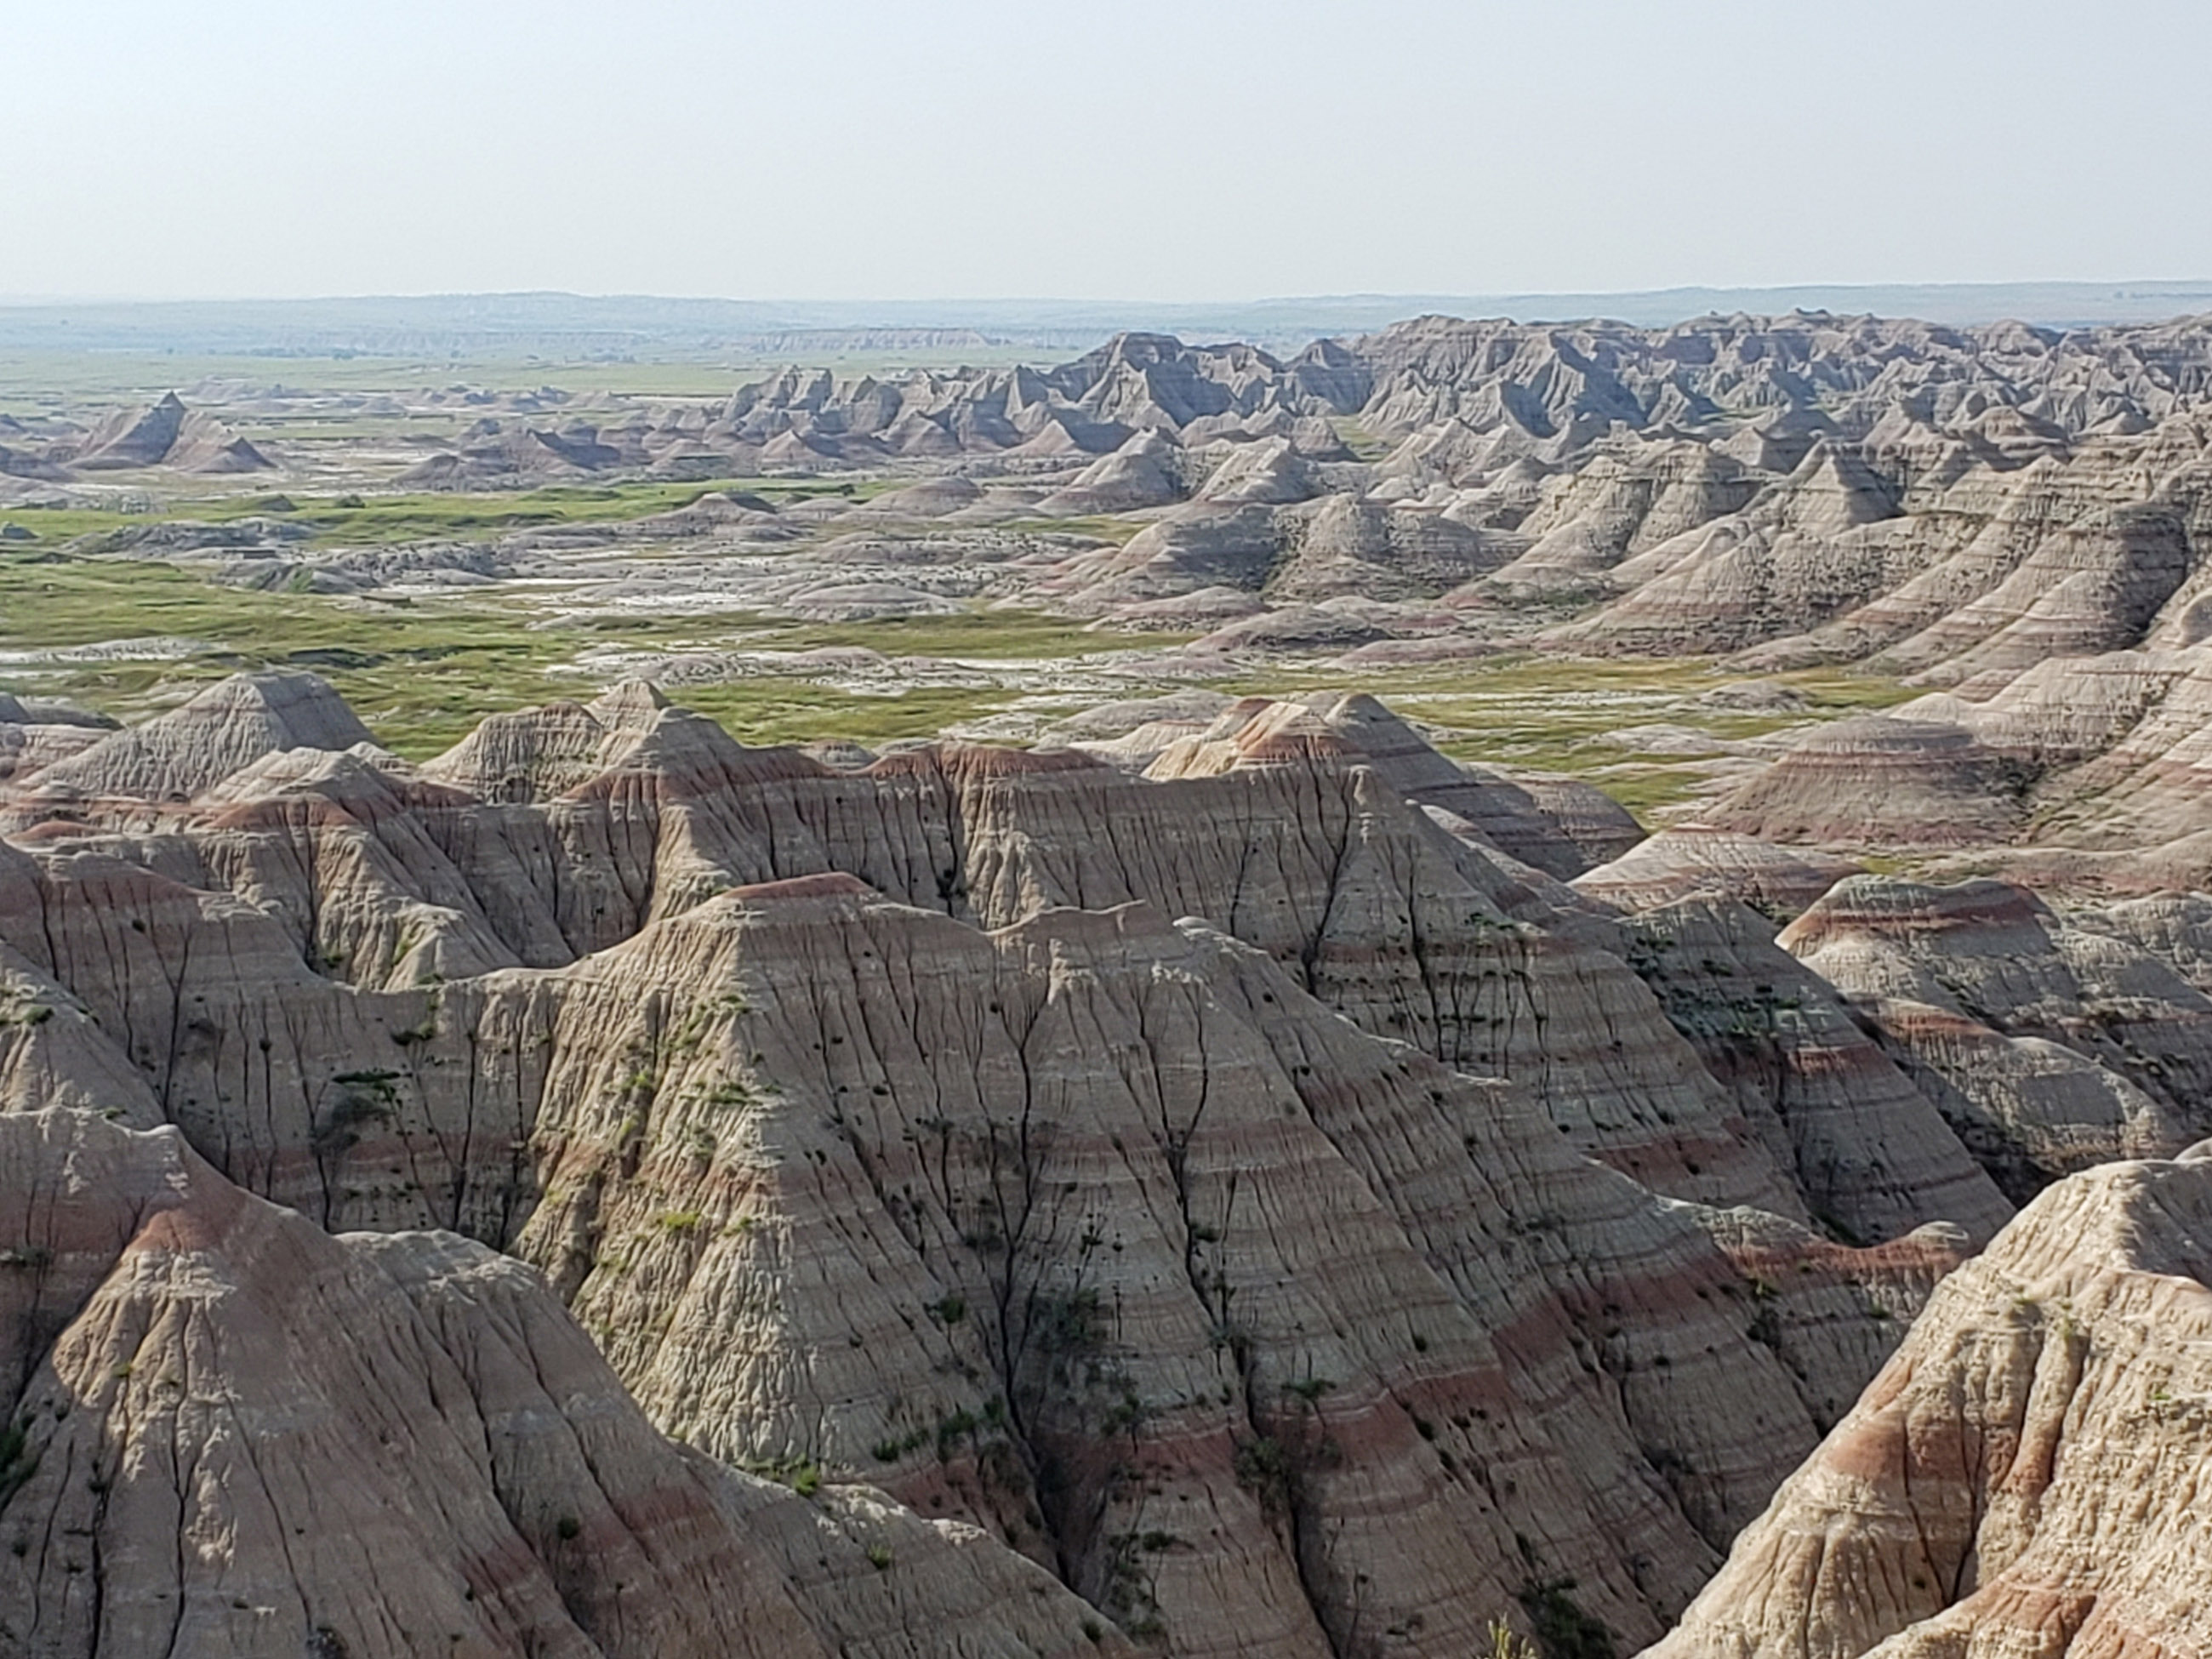 View of the Badlands from the Rim Road at Badlands National Park